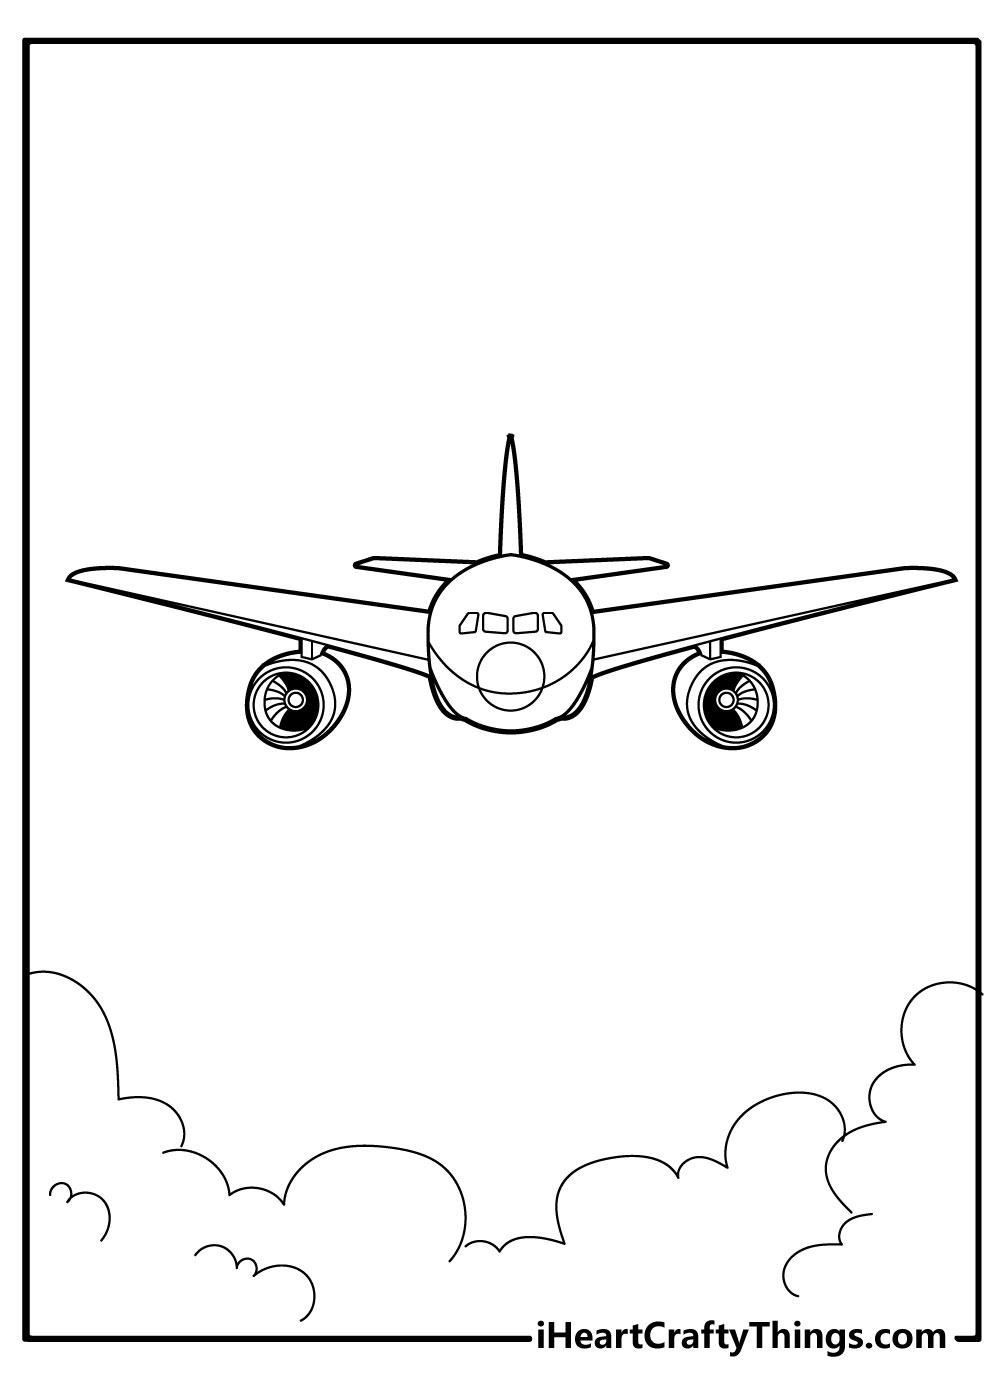 Airplane Coloring Pages free printable slides